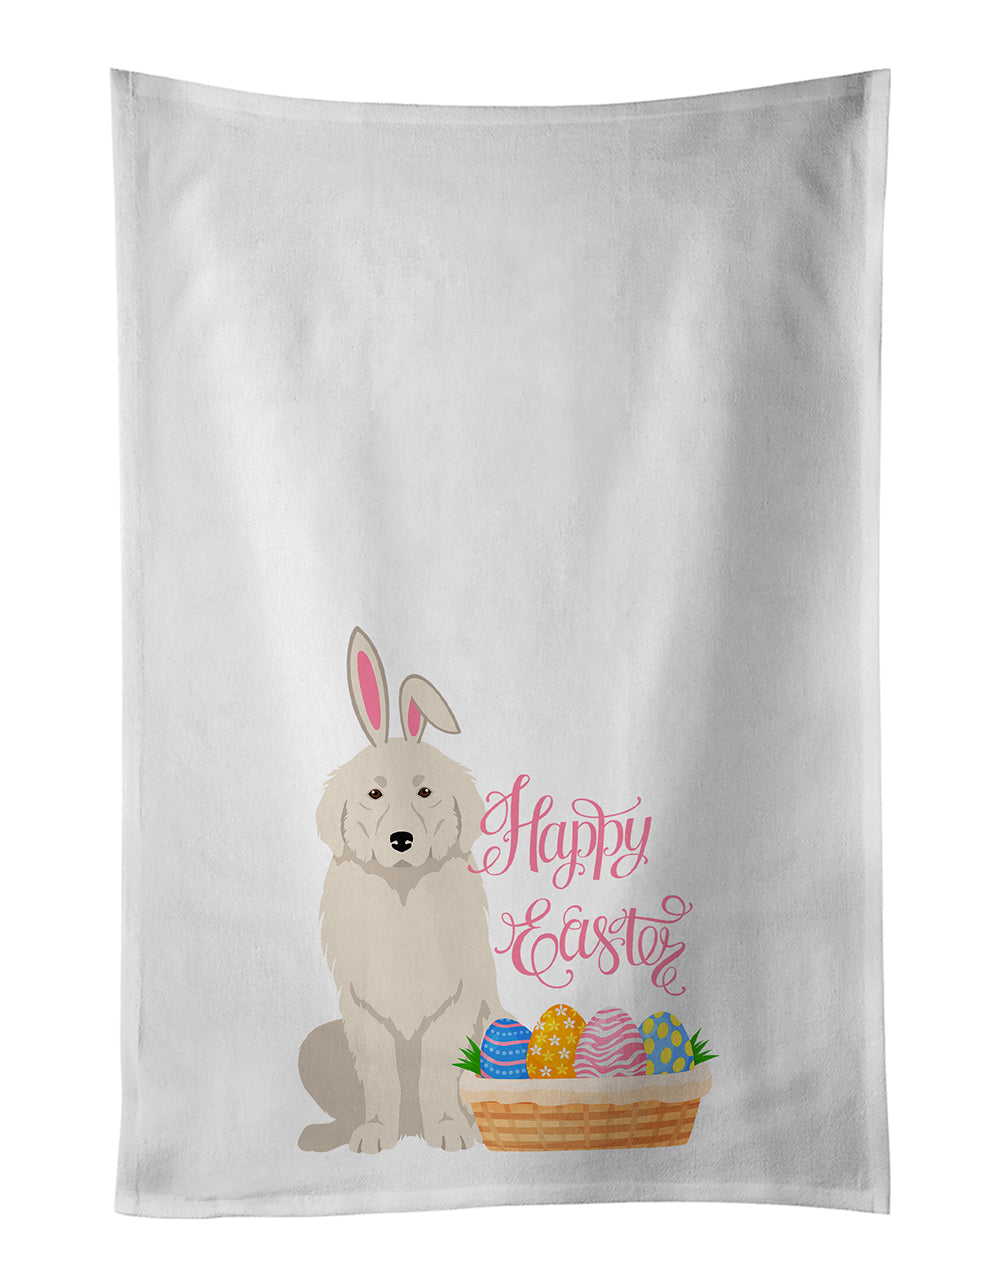 Buy this Great Pyrenees Easter White Kitchen Towel Set of 2 Dish Towels